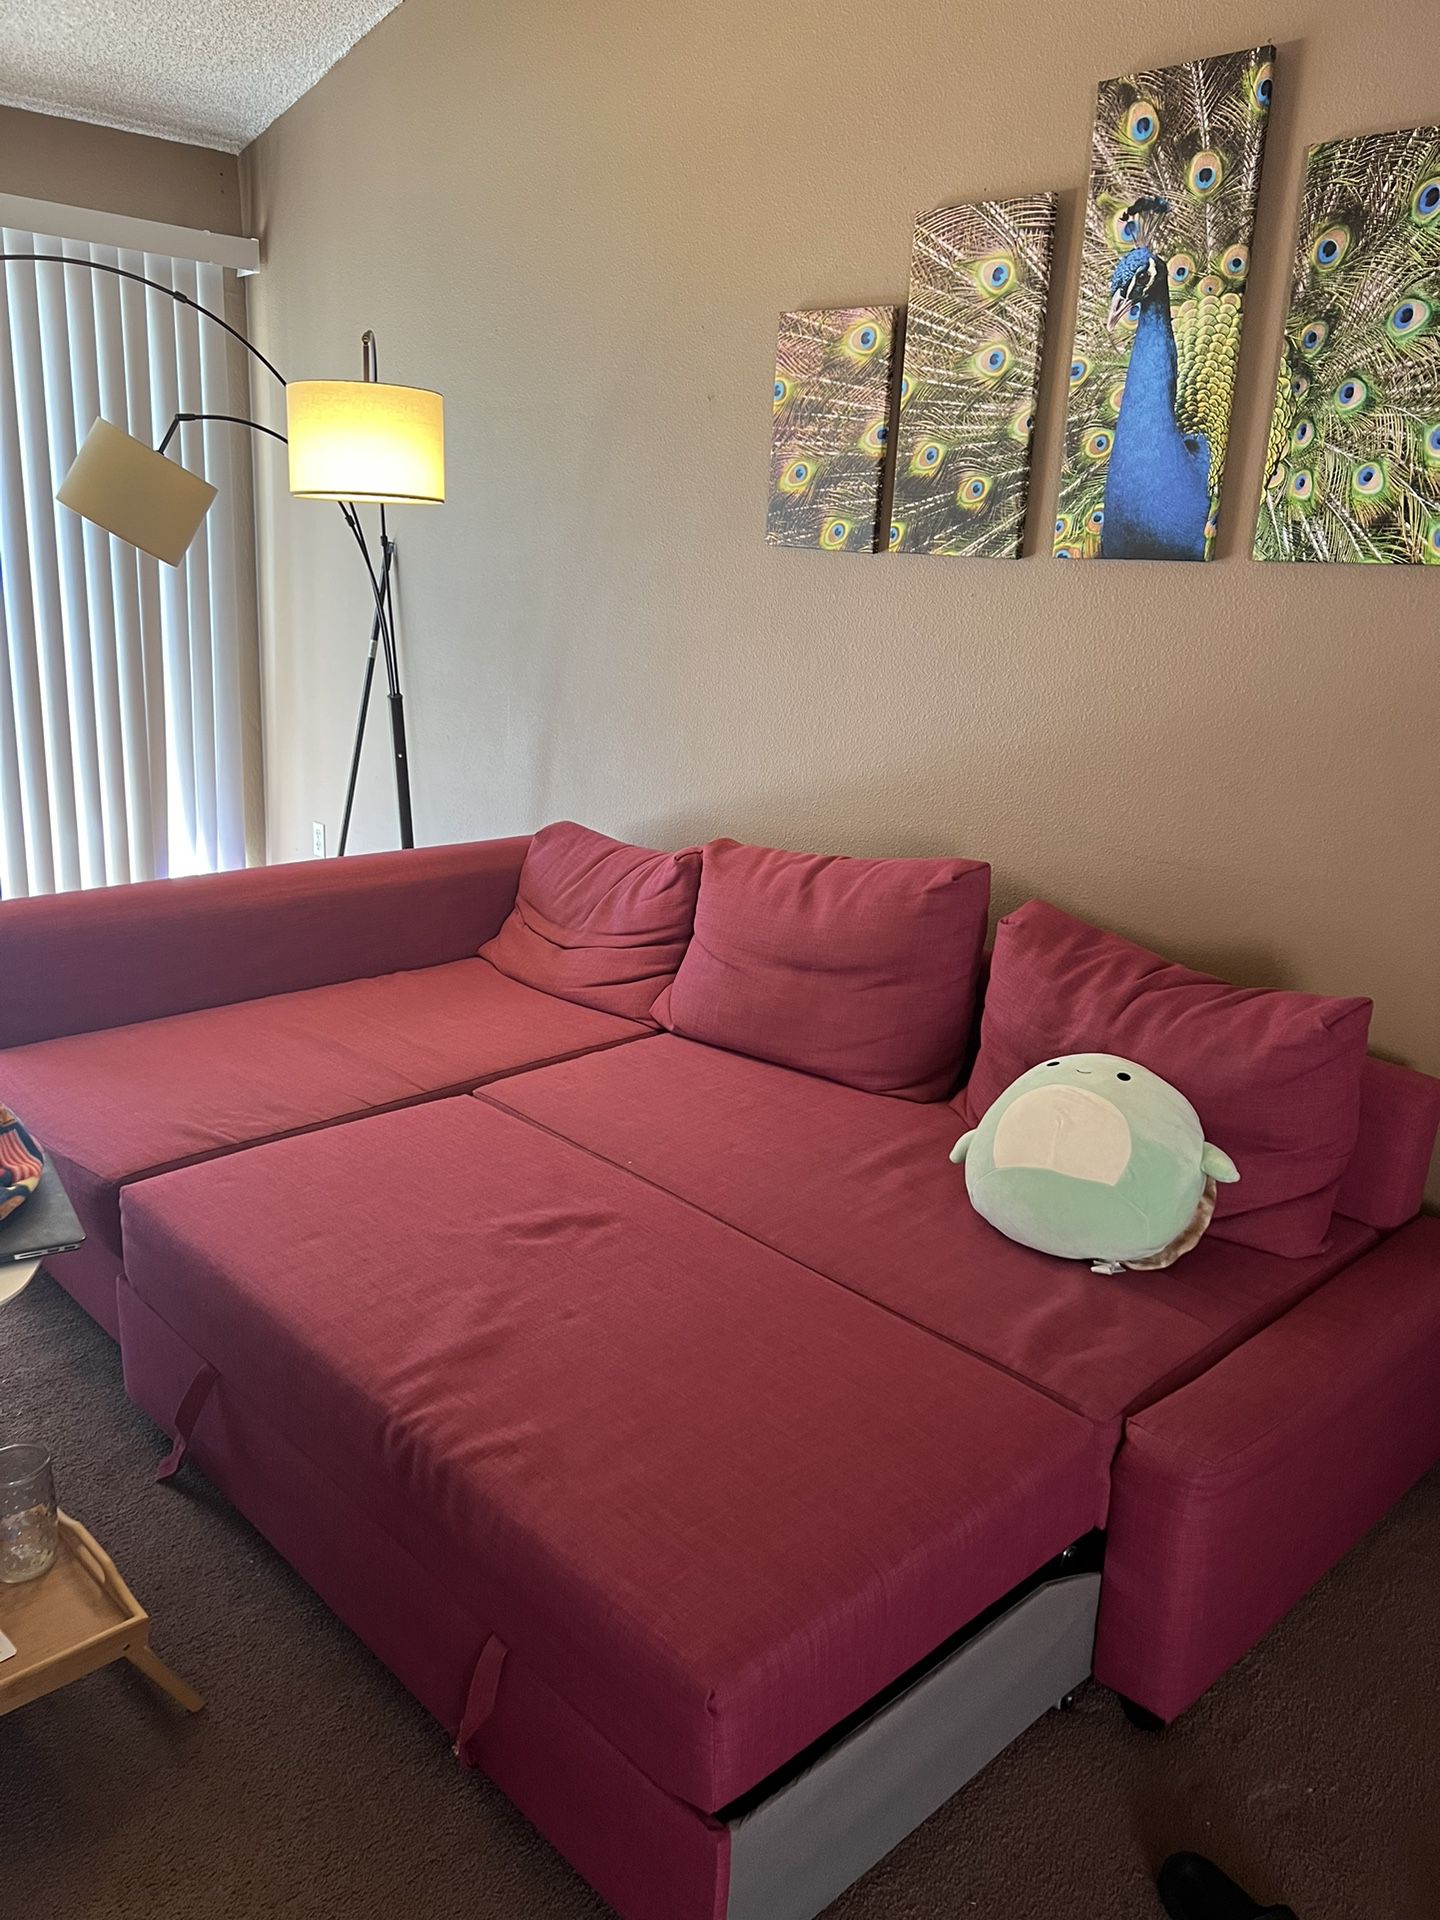 IKEA pink couch